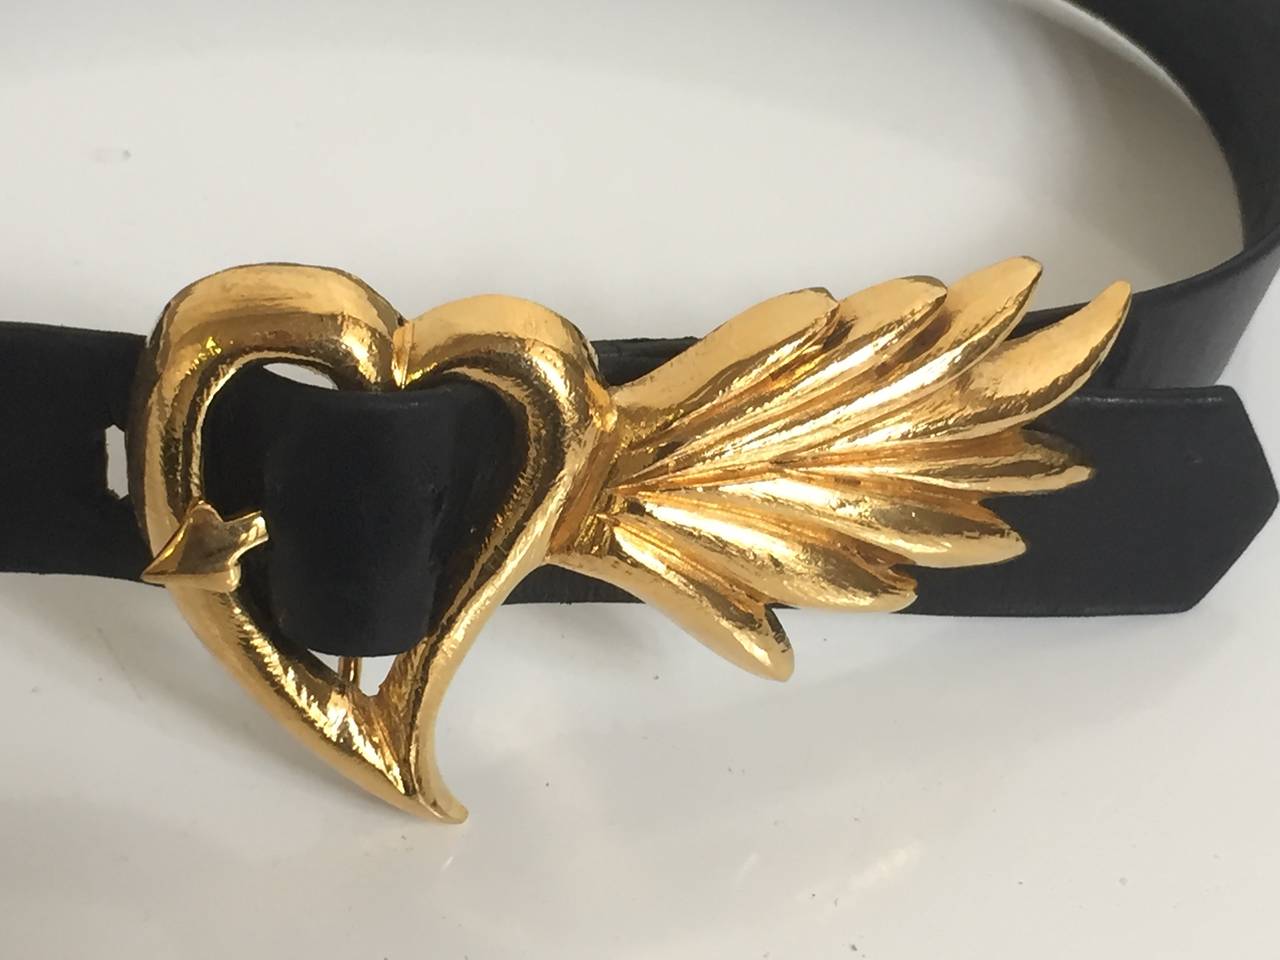 Karl Lagerfeld 1980s gold flaming heart black leather belt size small and made in France. The belt is 33